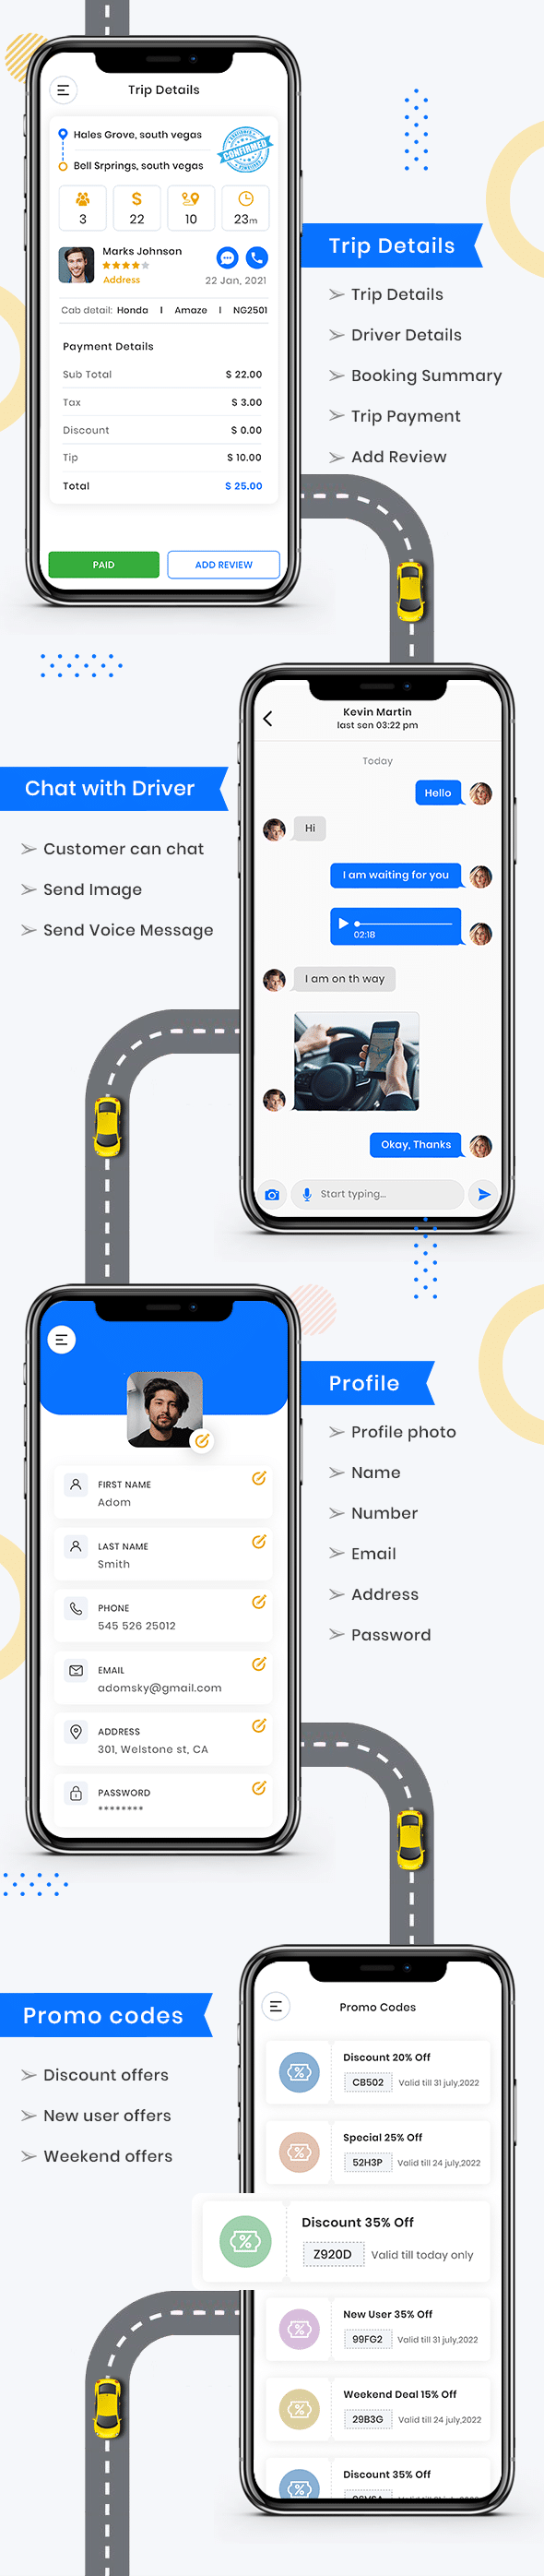 CabME - Flutter Complete Taxi app | Taxi Booking Solution - 10